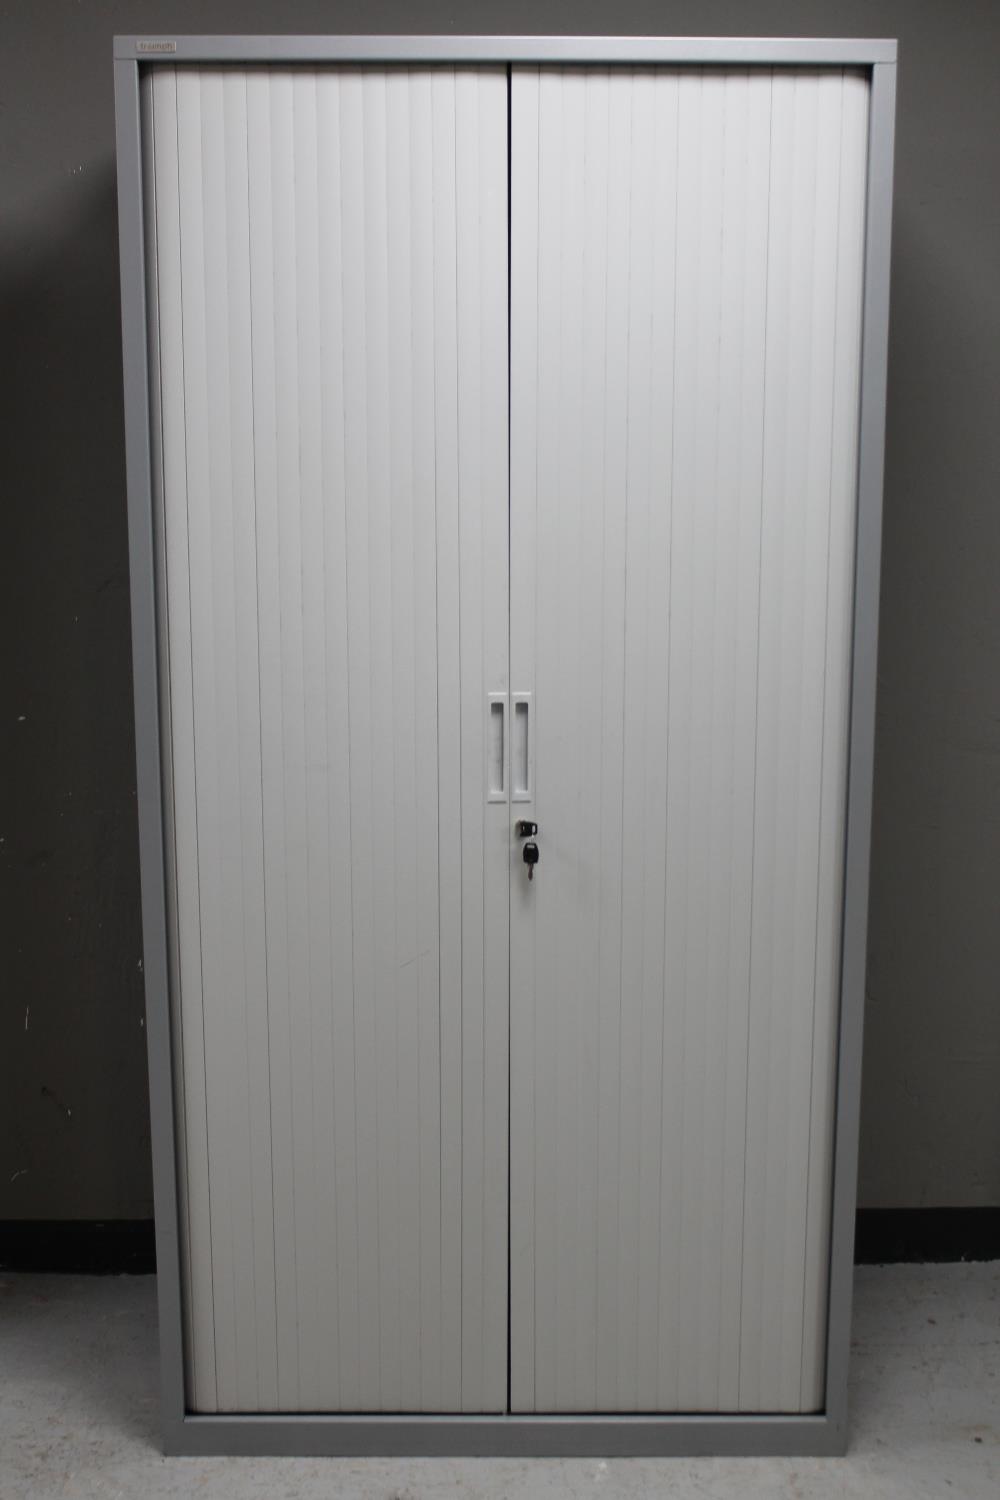 A Triumph metal shutter door office stationary cabinet with key